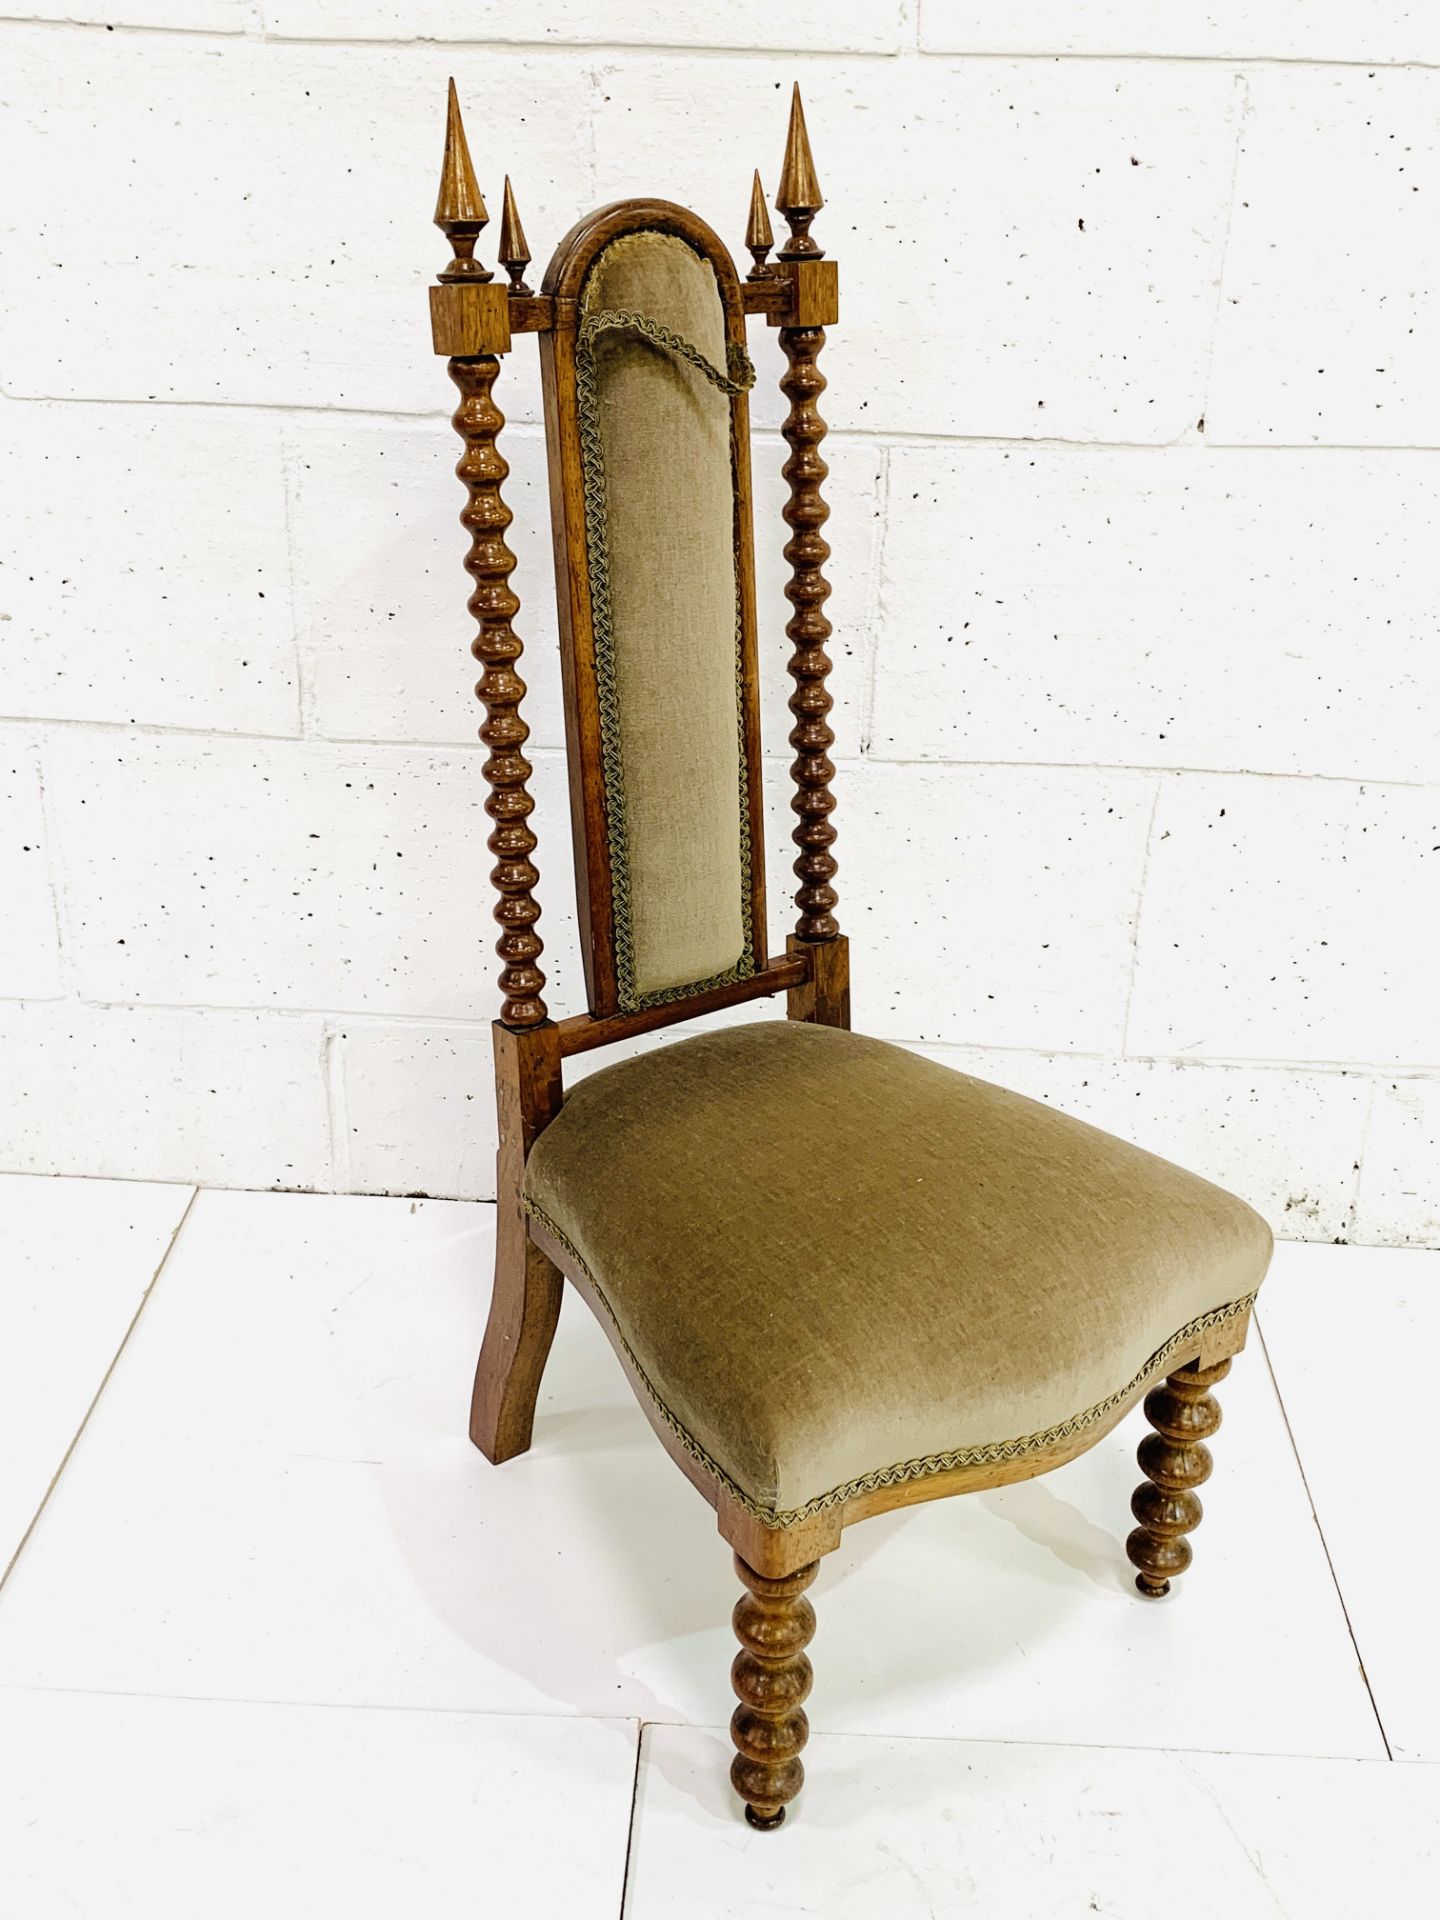 Upholstered decorative hall chair - Image 3 of 4